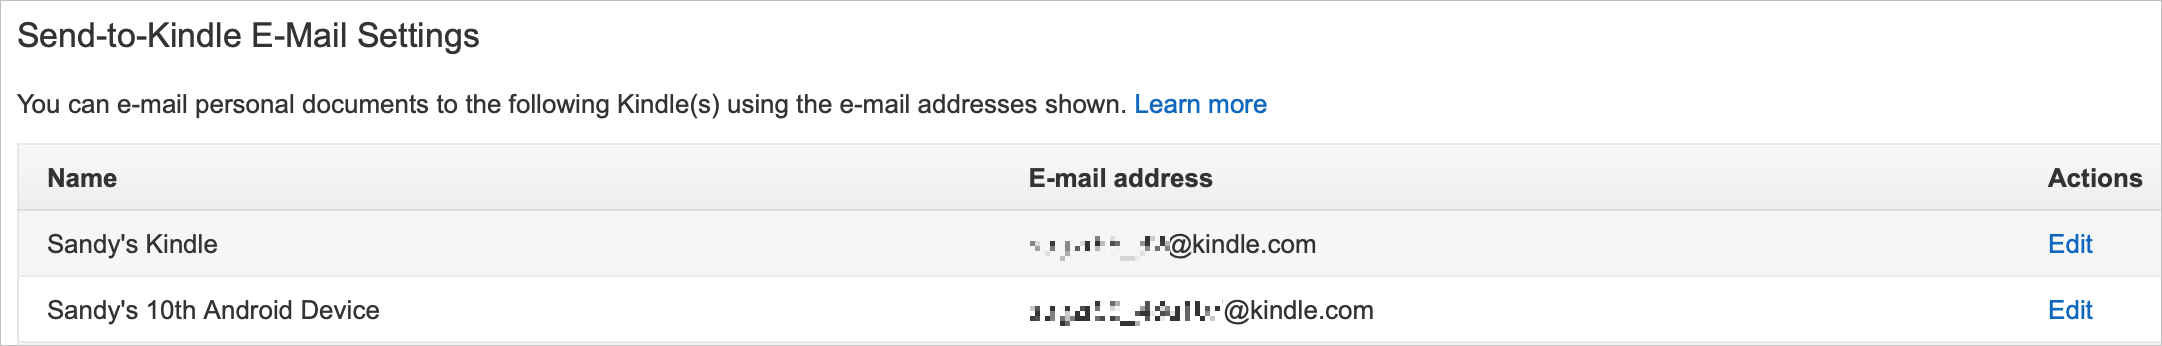 Send to Kindle Email Settings